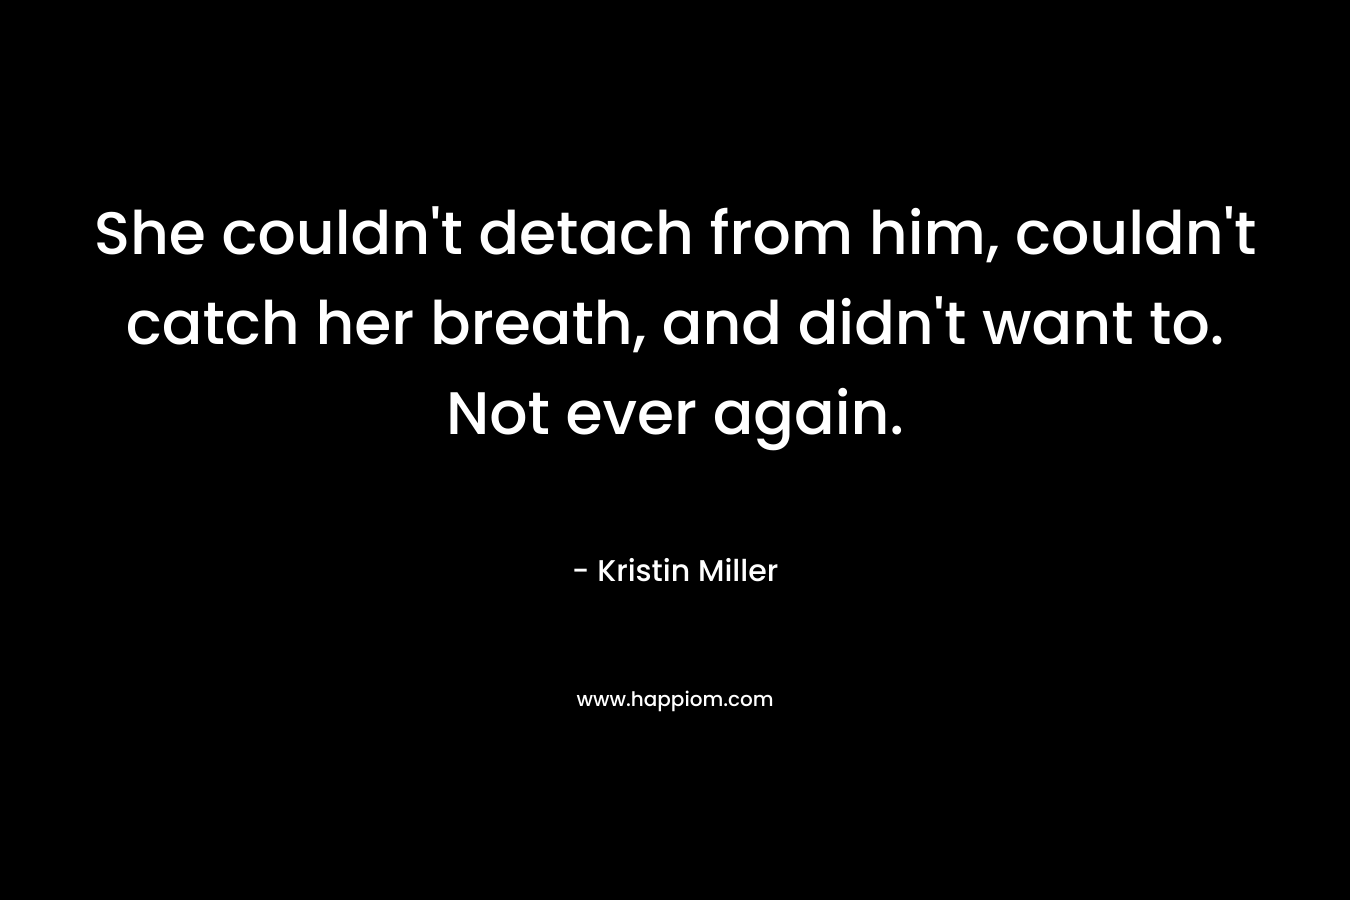 She couldn’t detach from him, couldn’t catch her breath, and didn’t want to. Not ever again. – Kristin Miller